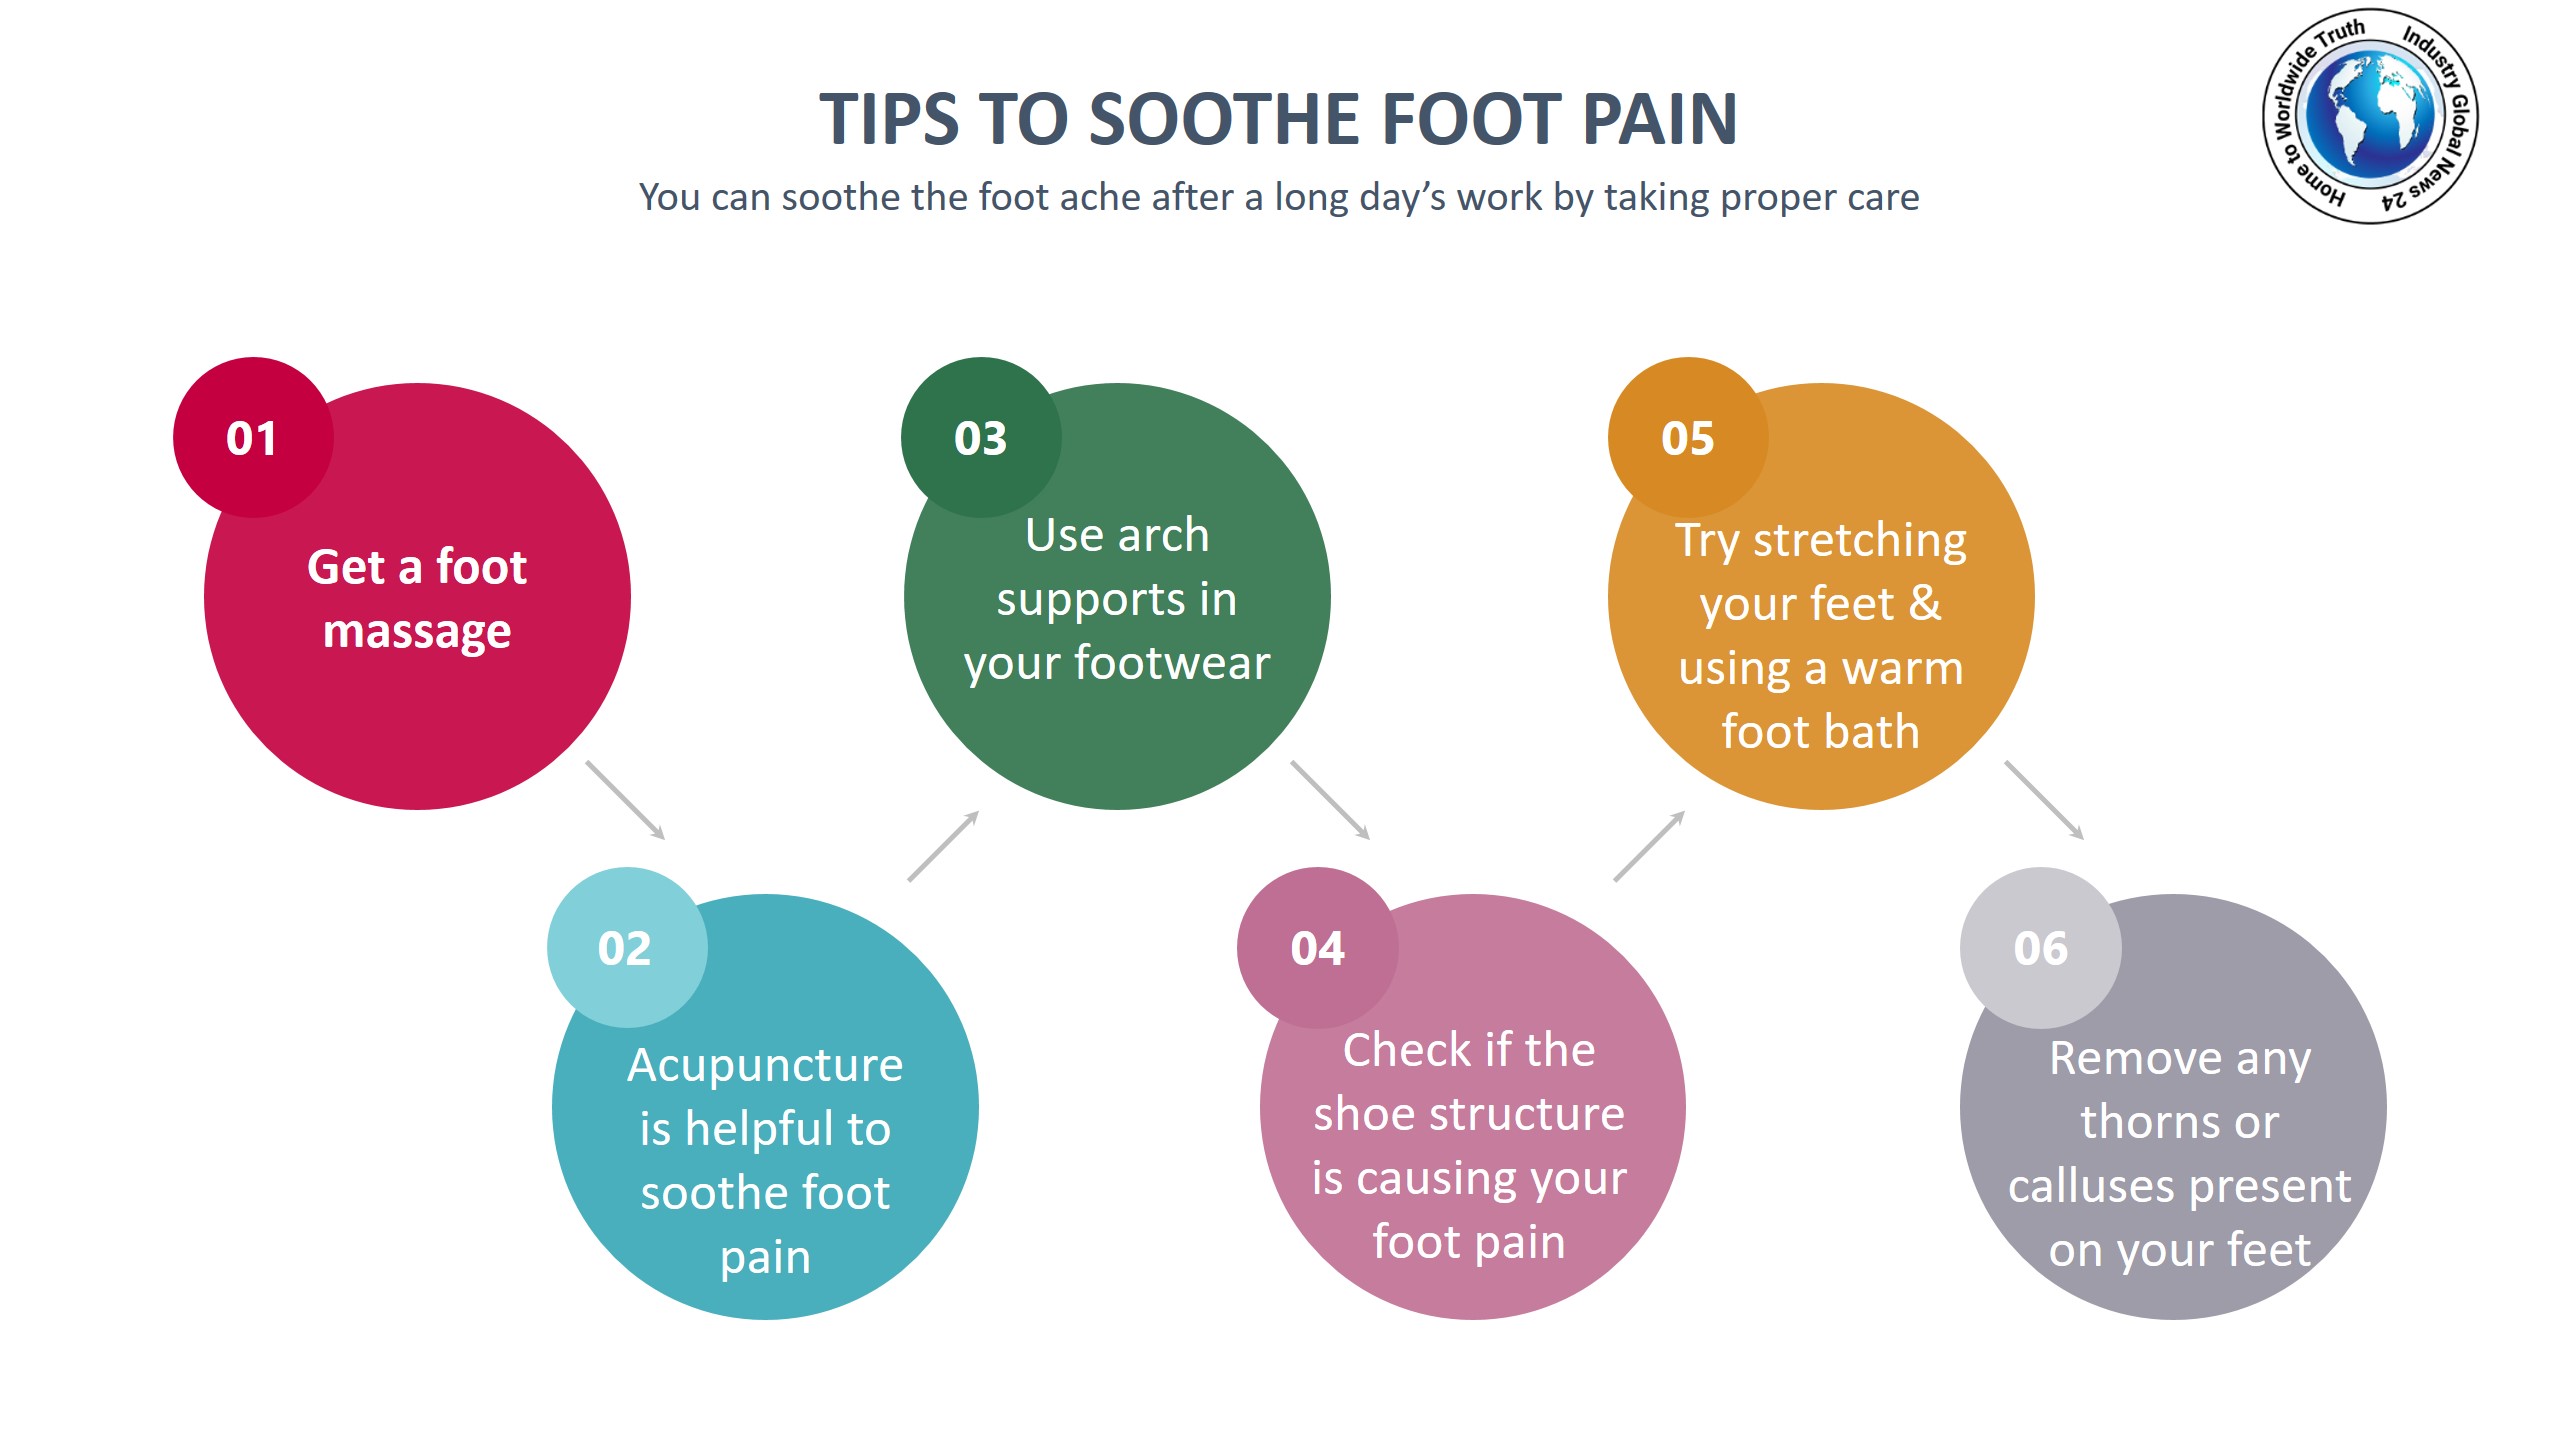 Tips to soothe foot pain | Industry Global News24